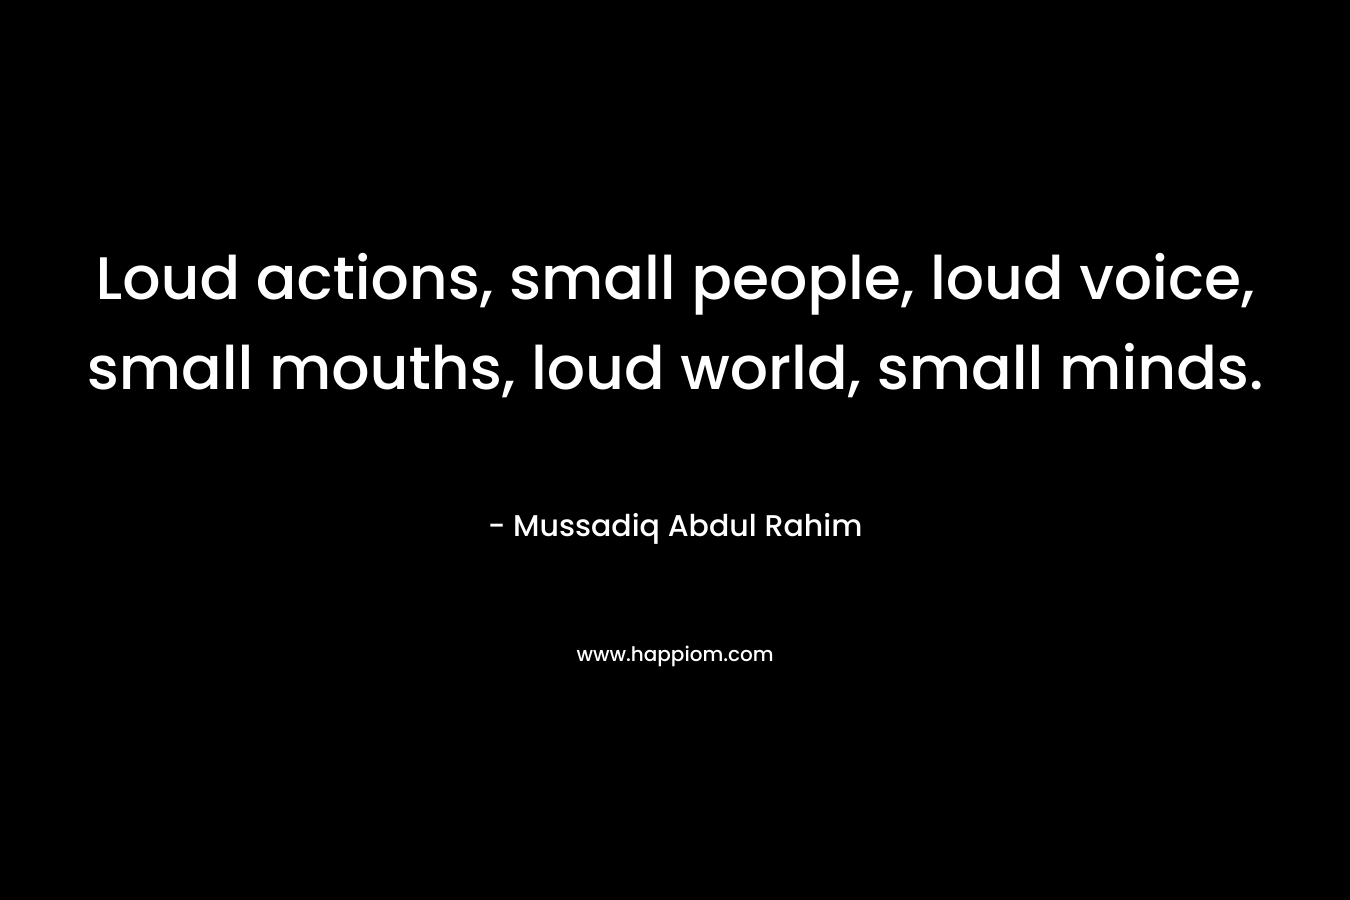 Loud actions, small people, loud voice, small mouths, loud world, small minds.